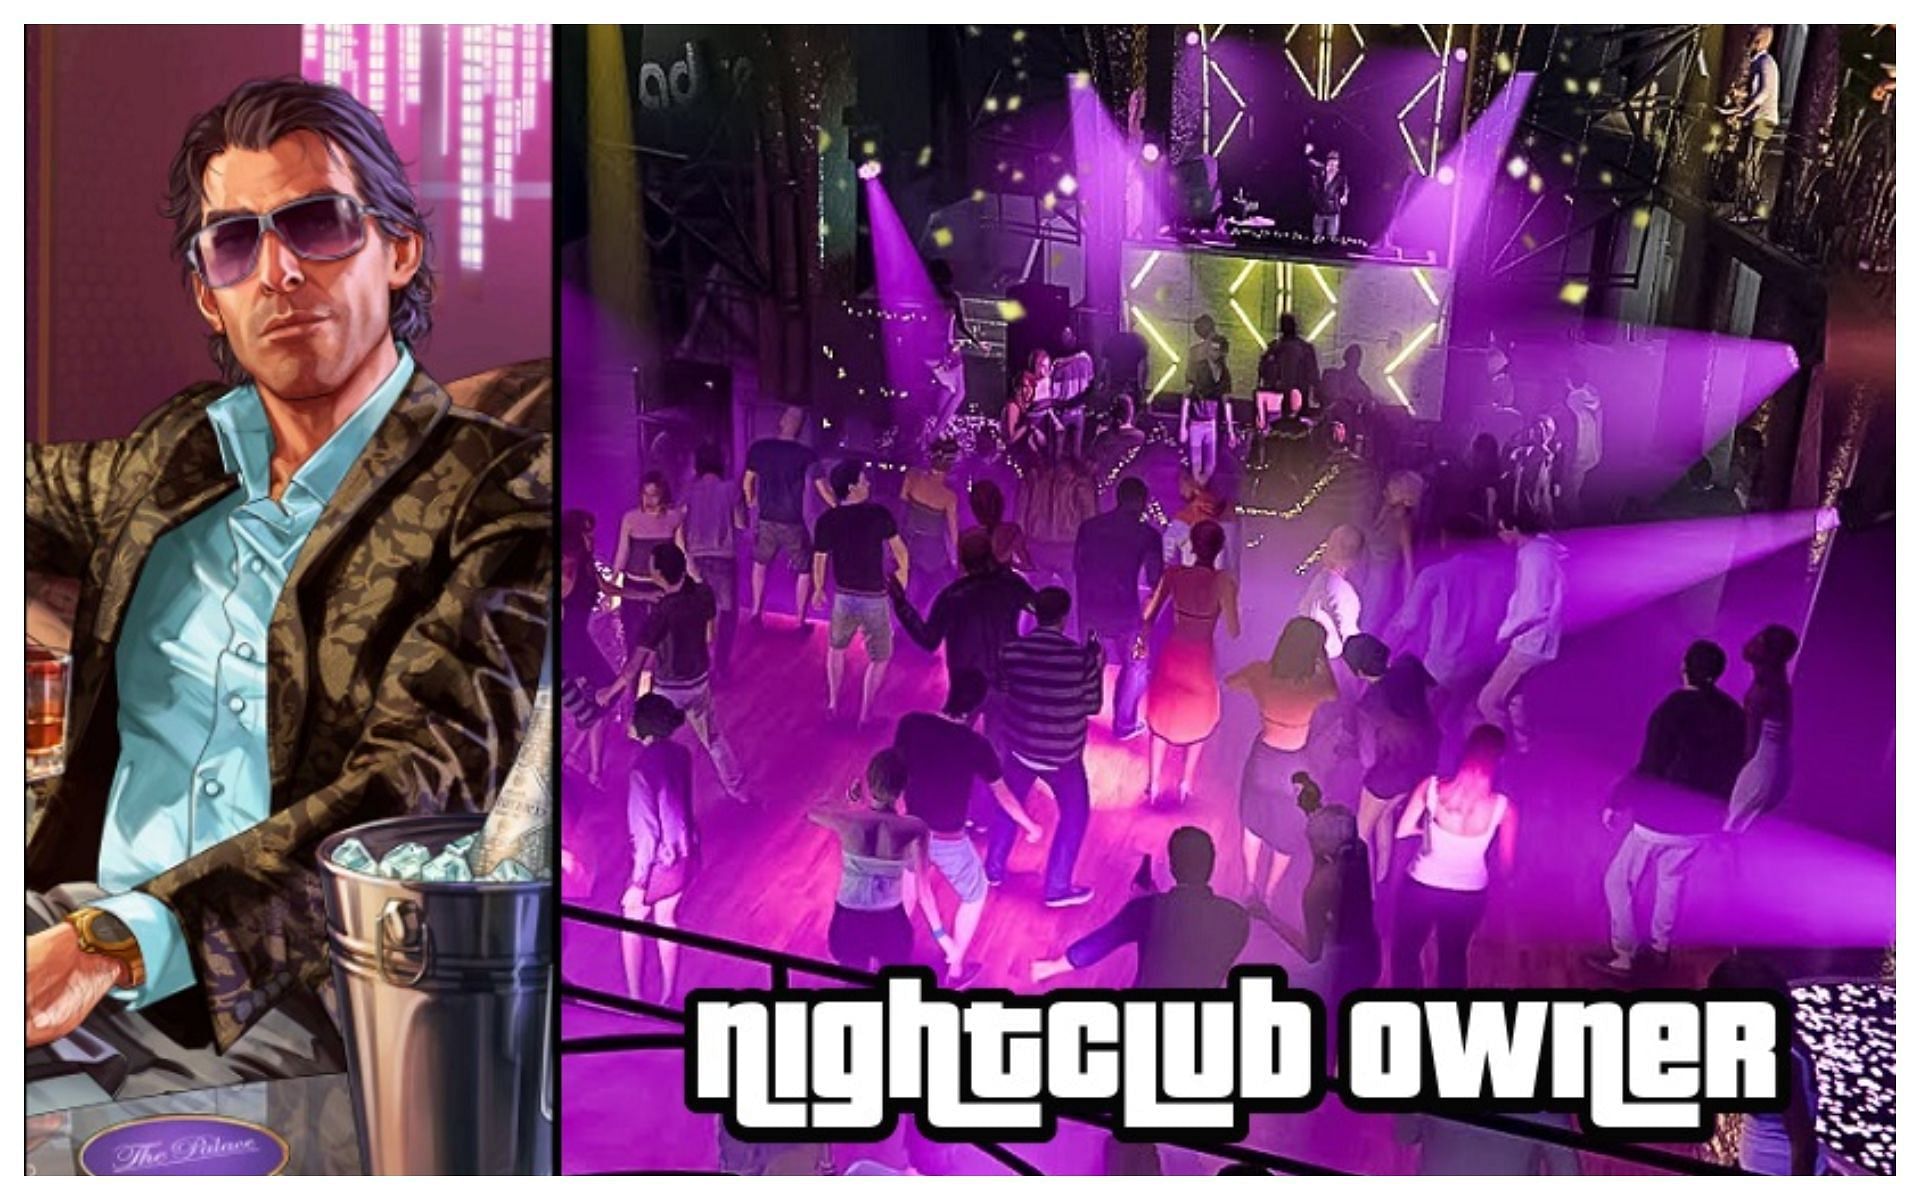 My Brother Surprises Me With A Nightclub In GTA V (2020)